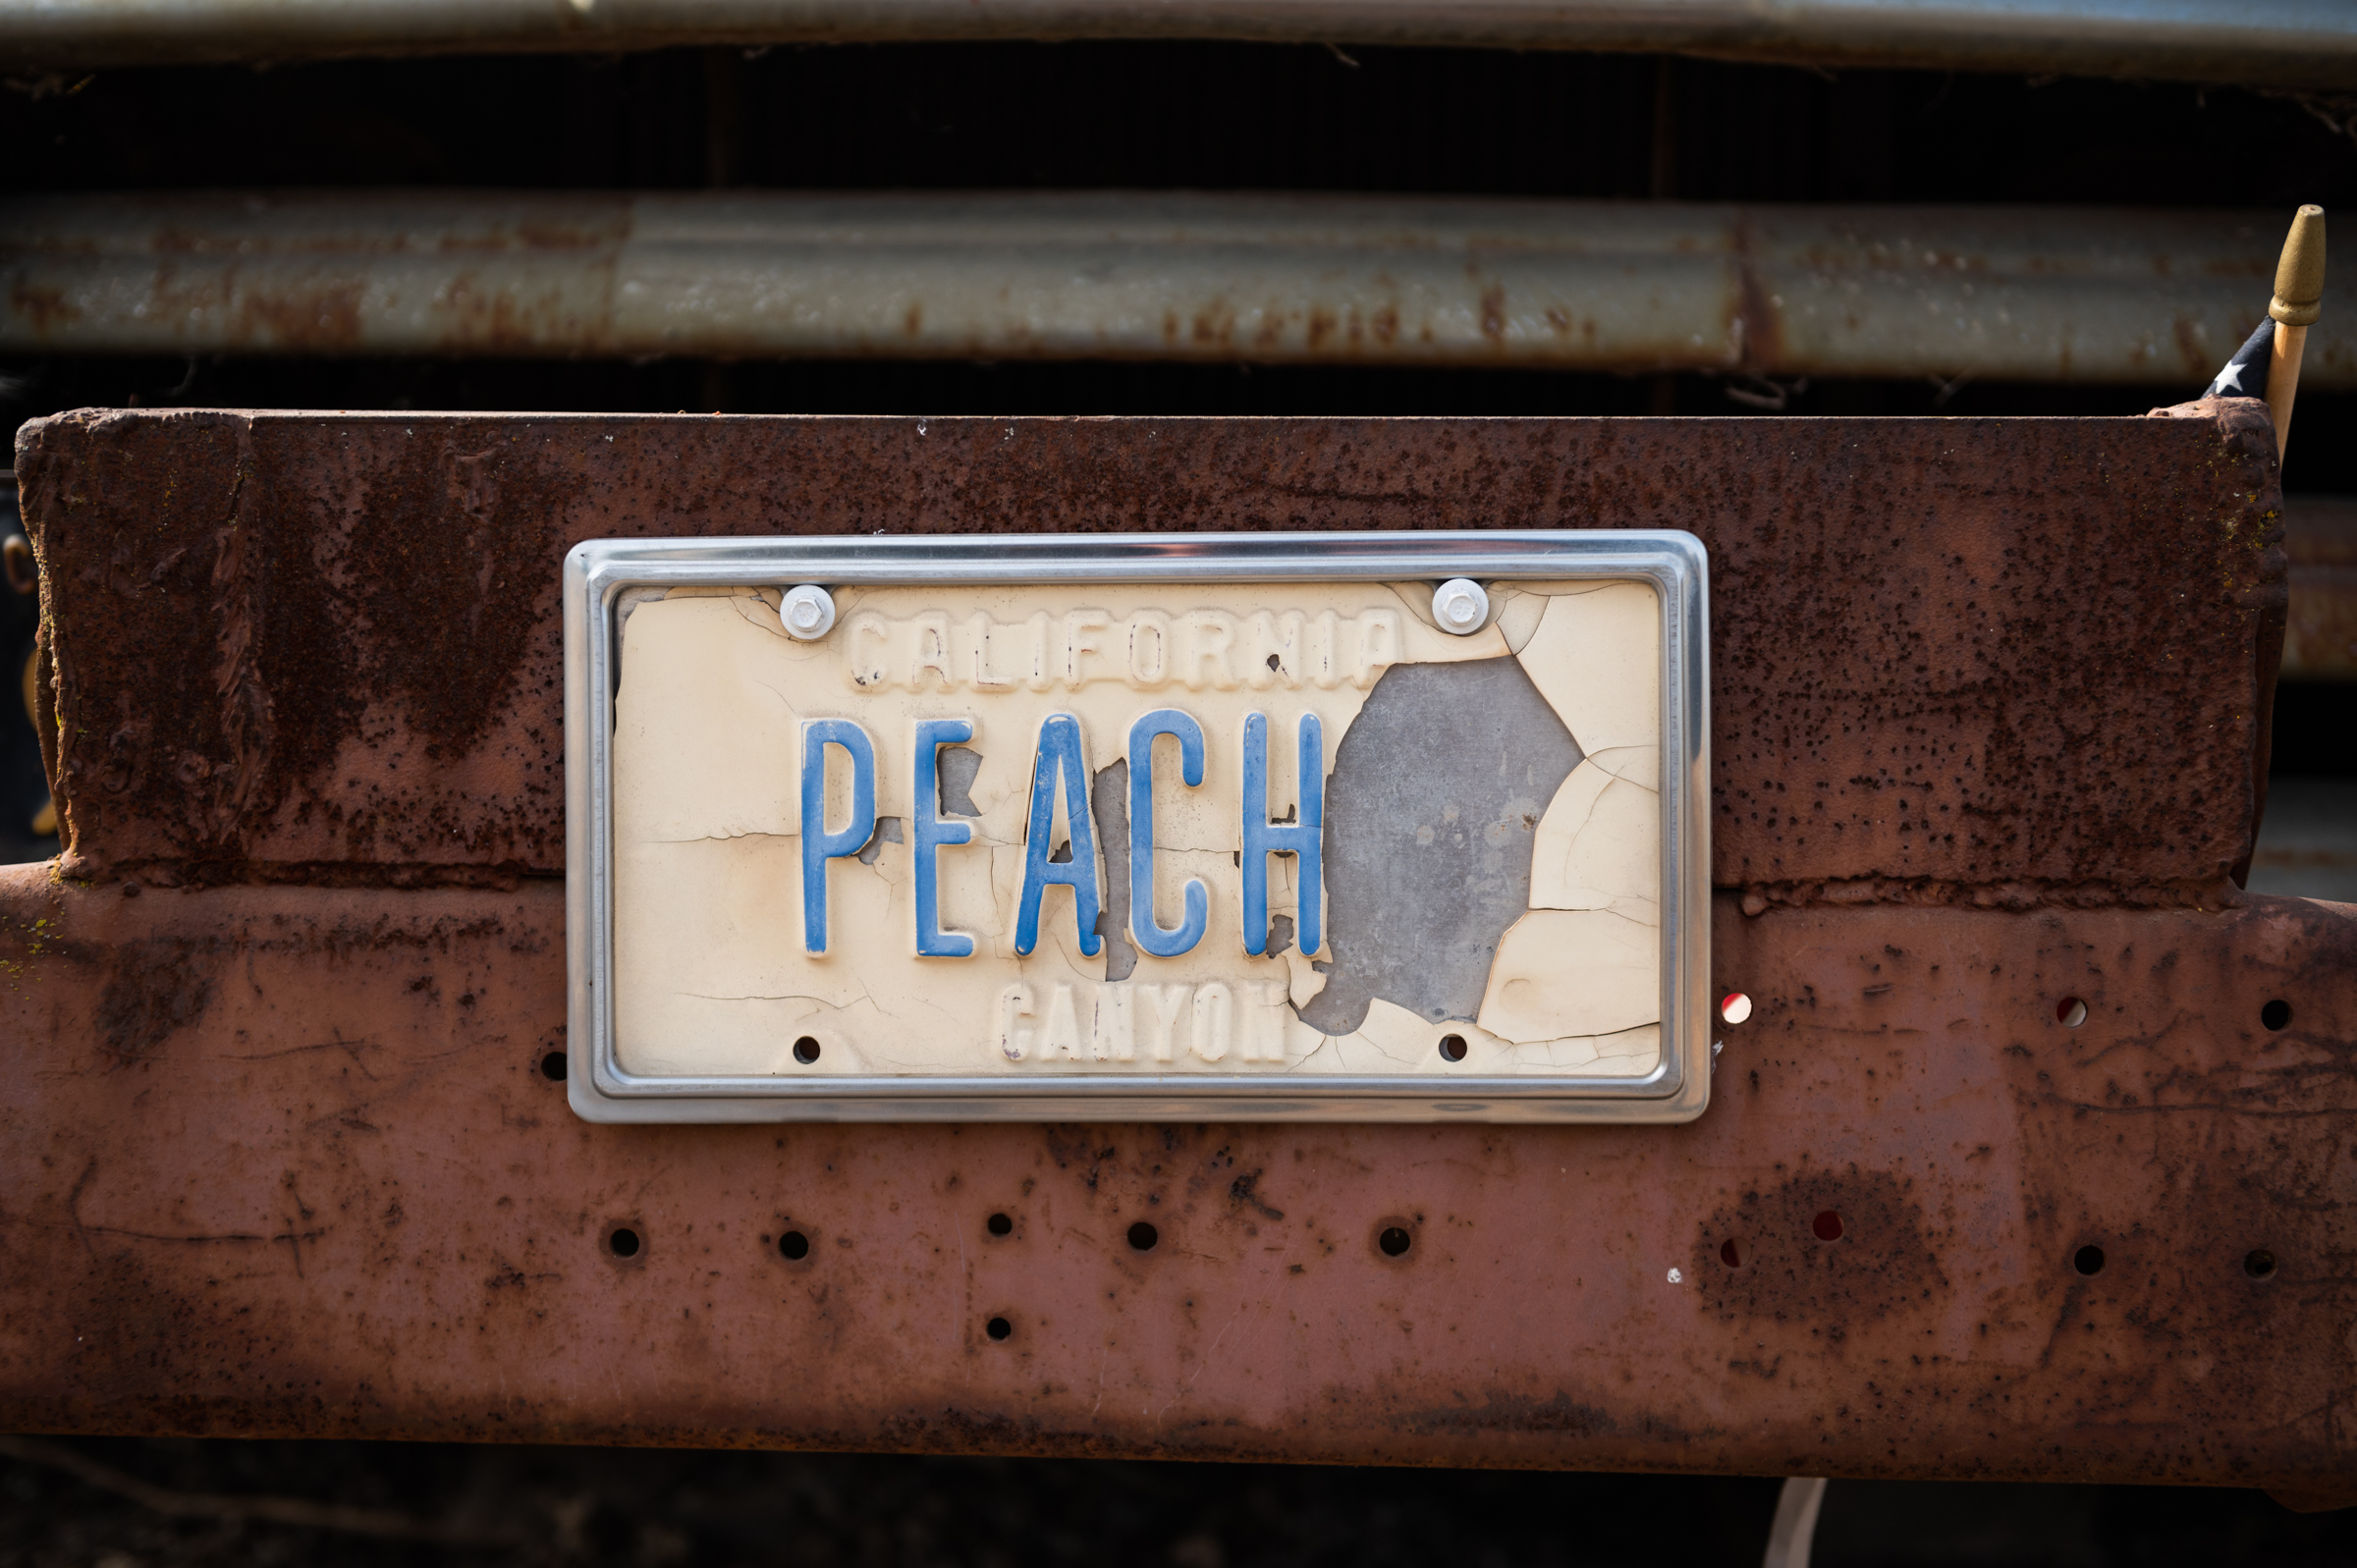 A faded license plate at Peachy Canyon